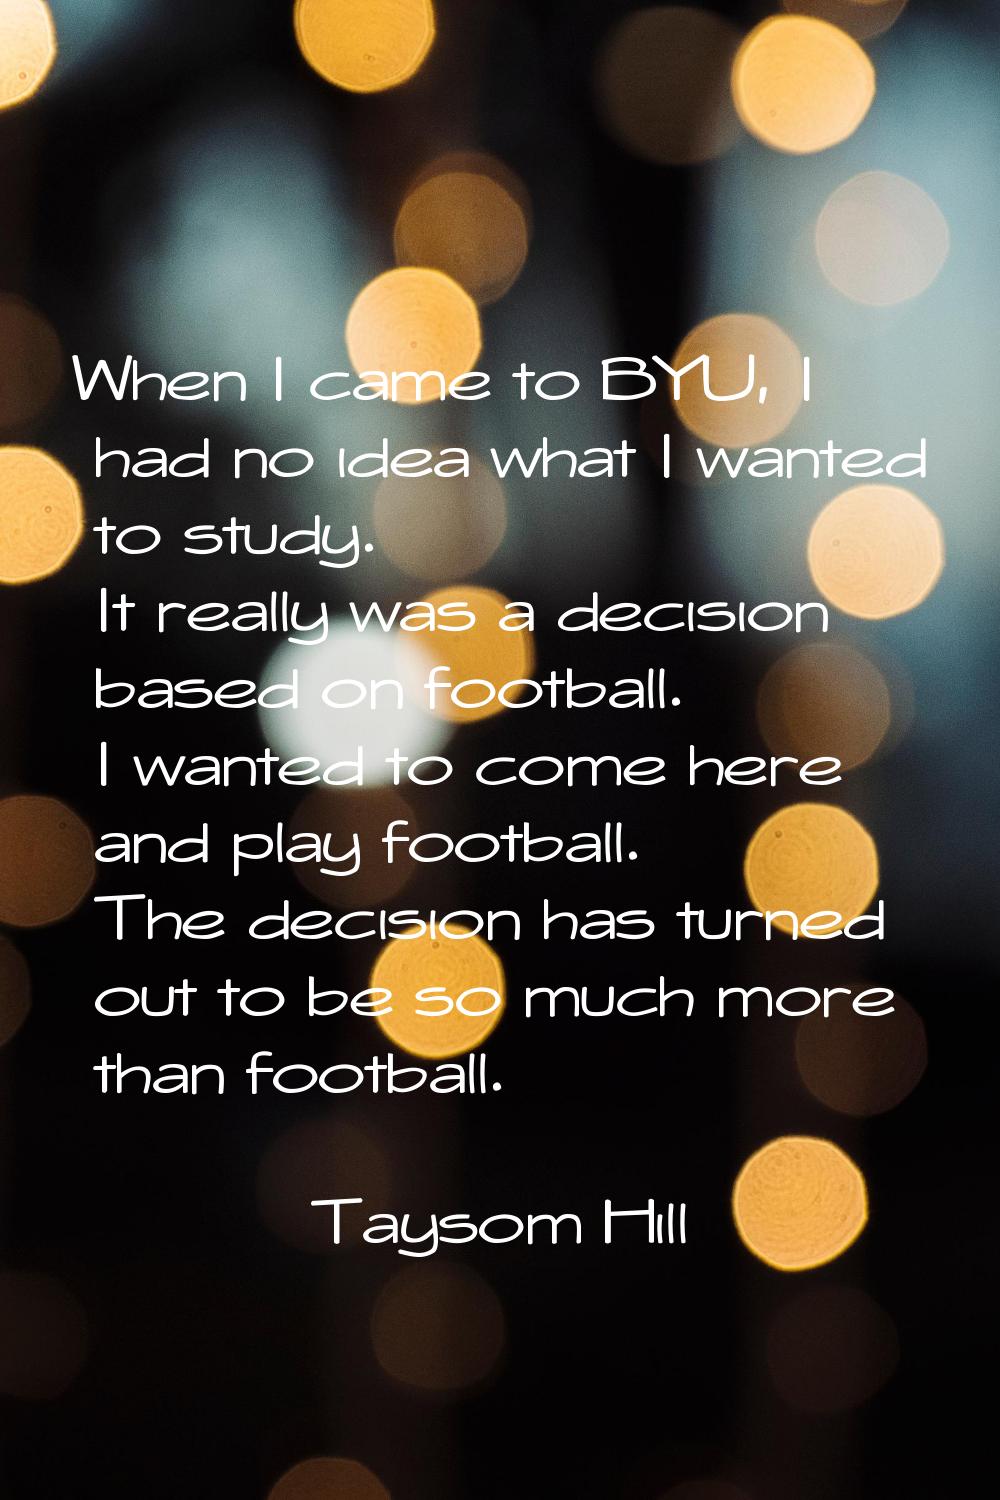 When I came to BYU, I had no idea what I wanted to study. It really was a decision based on footbal